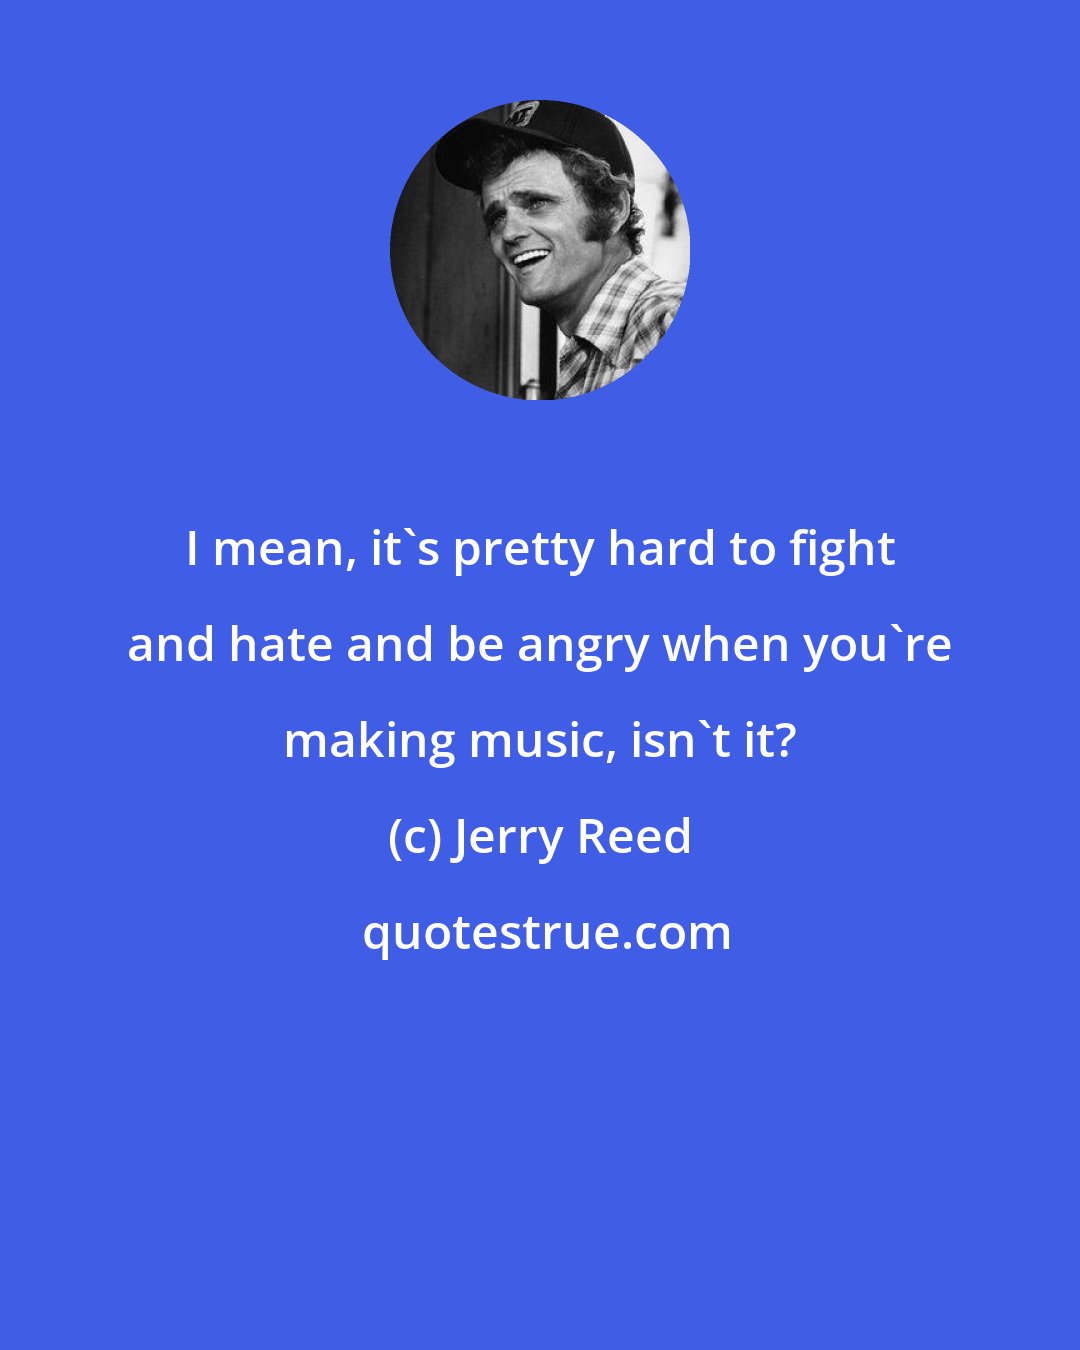 Jerry Reed: I mean, it's pretty hard to fight and hate and be angry when you're making music, isn't it?